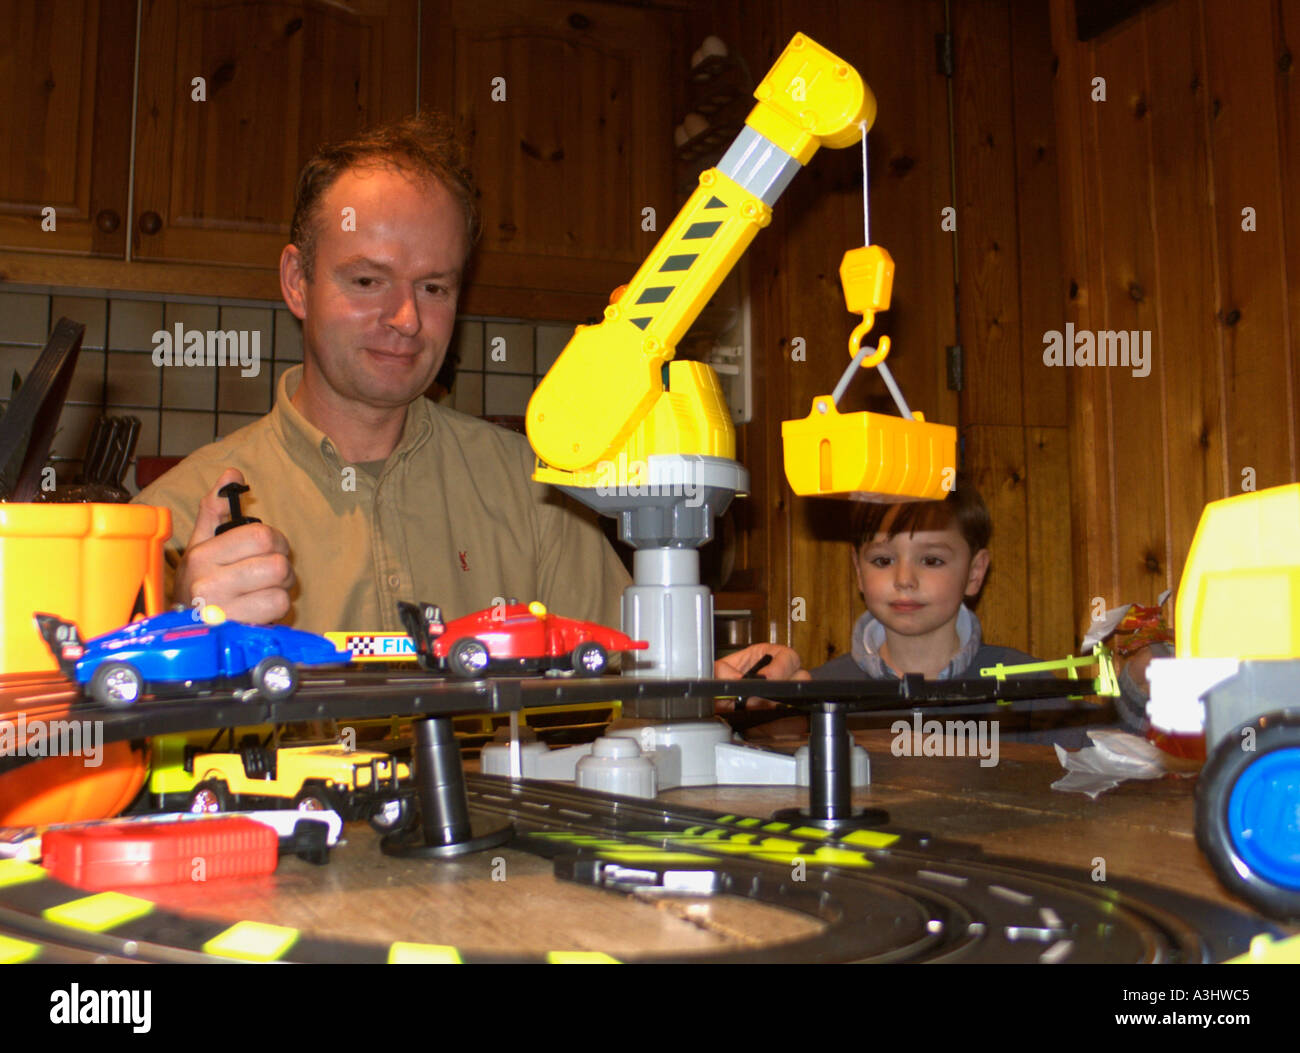 Man playing with child's toy, as young boy looks on. Never Growing Up! Stock Photo